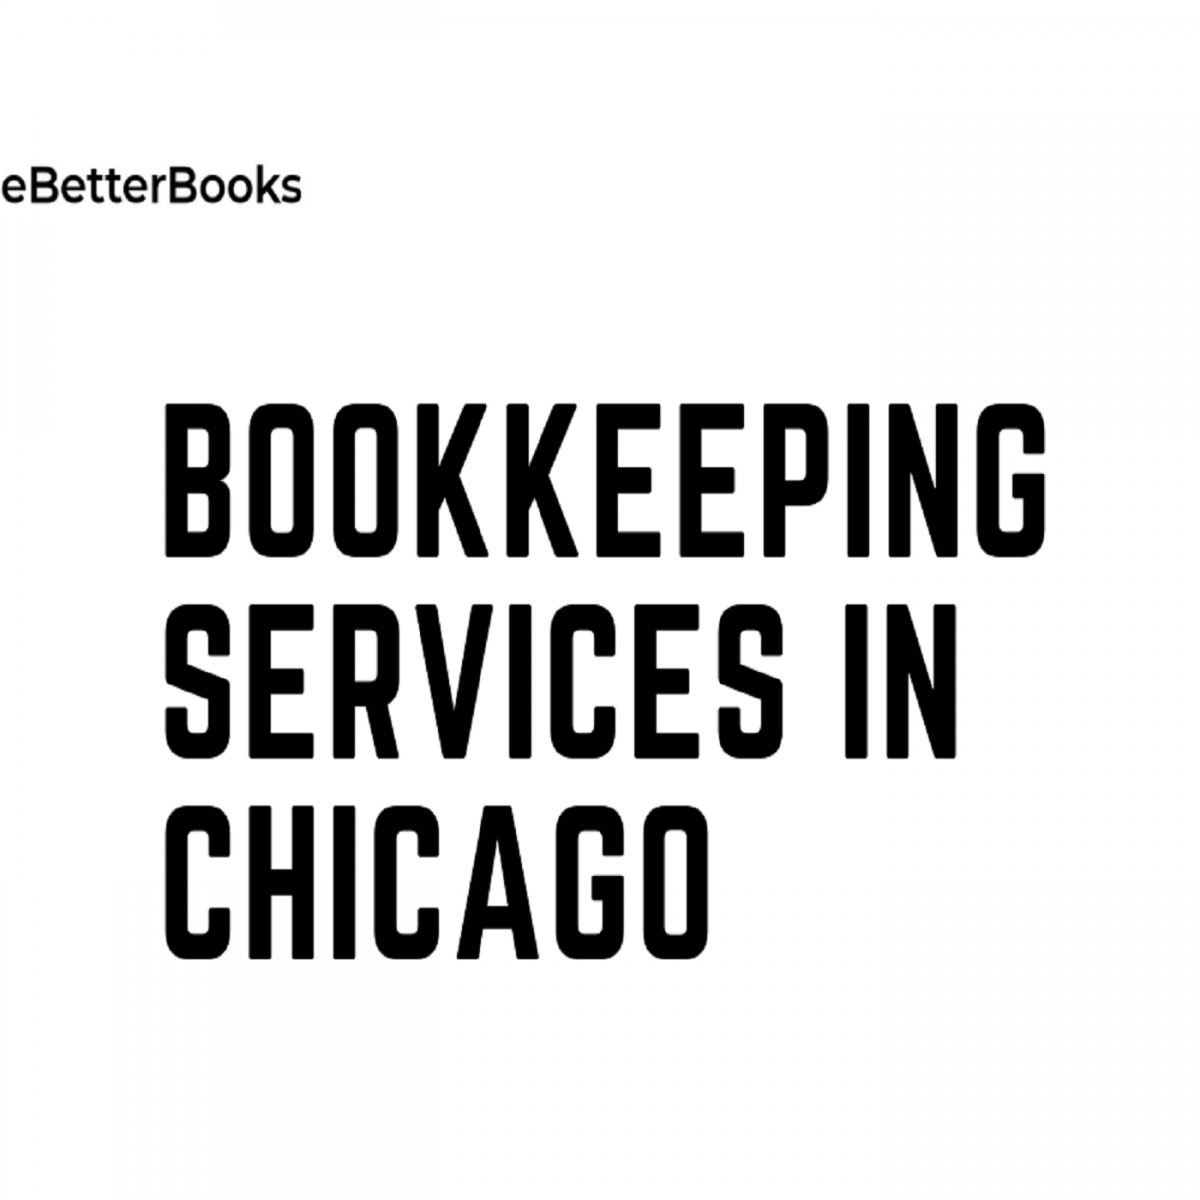 Bookkeeping Services in Chicago